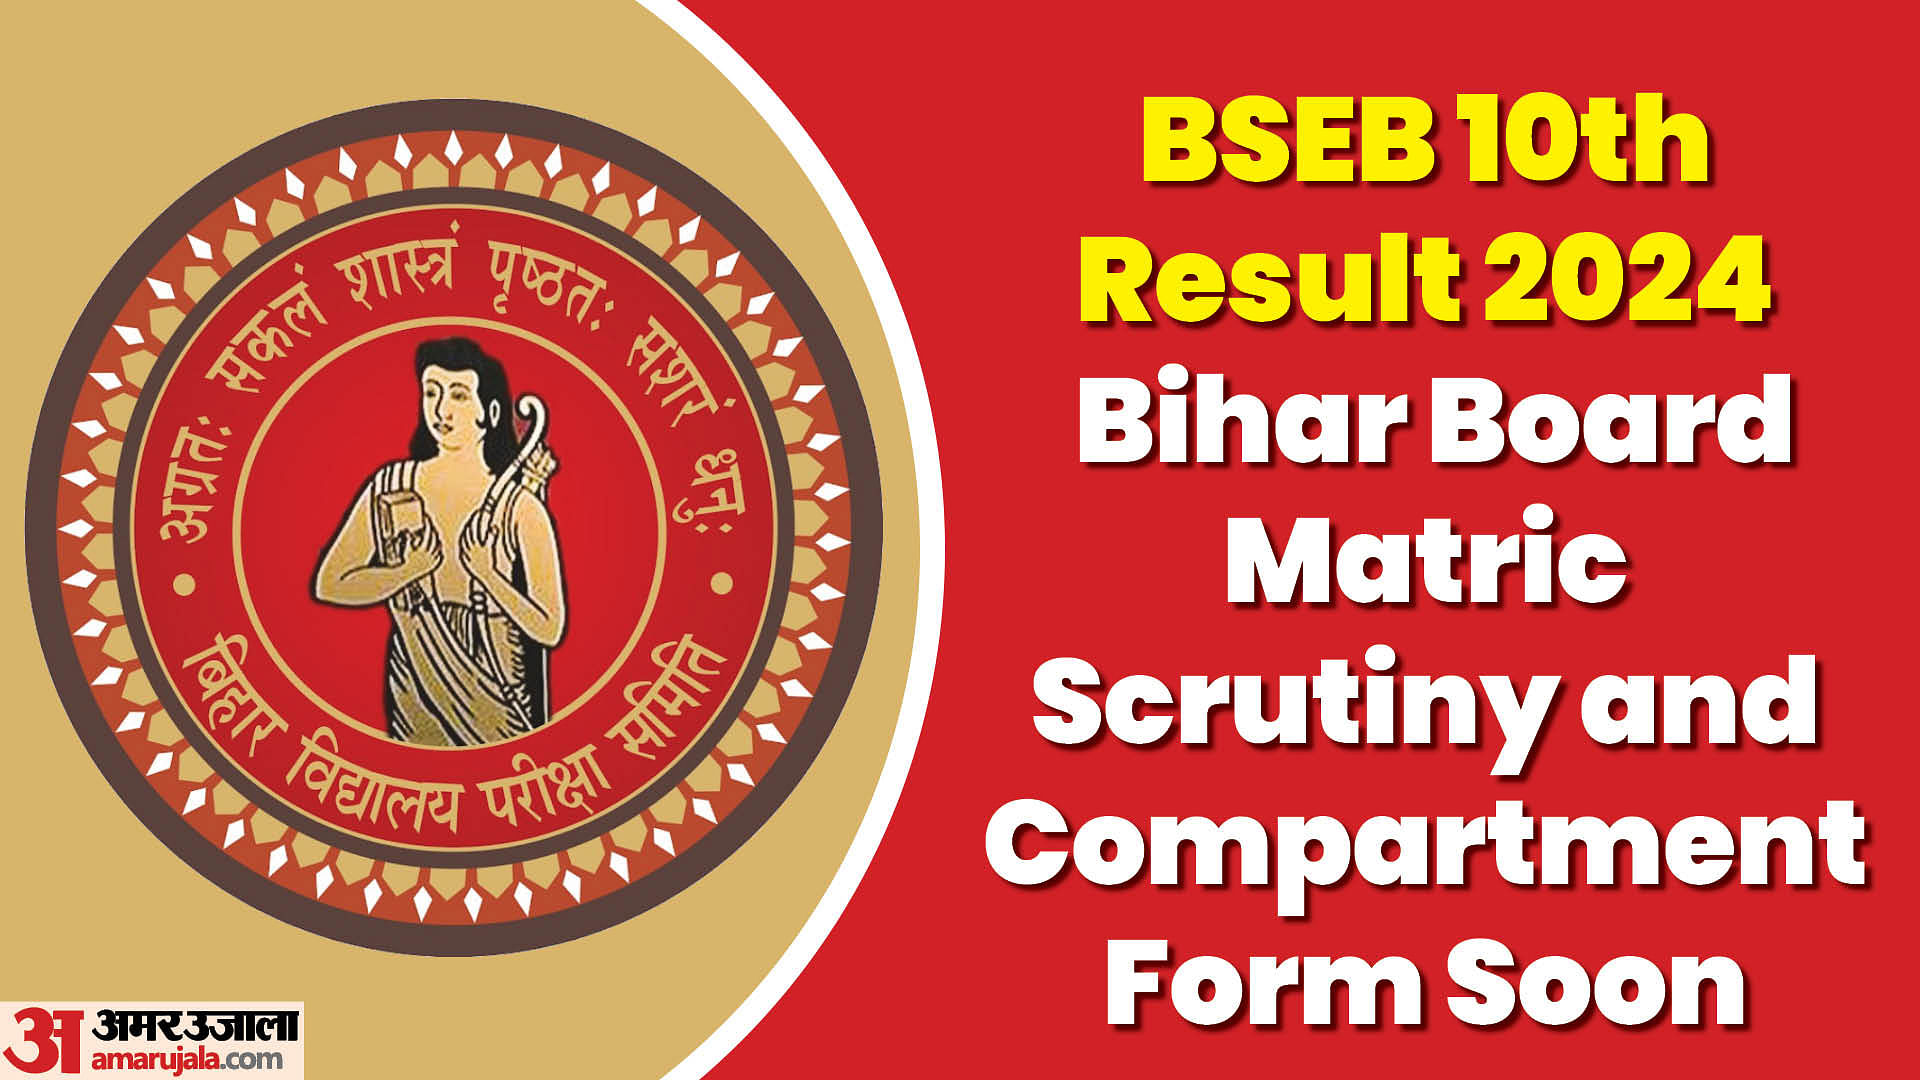 BSEB 10th Result 2024: Bihar Board Matric Scrutiny and compartment Form Soon; Check details here